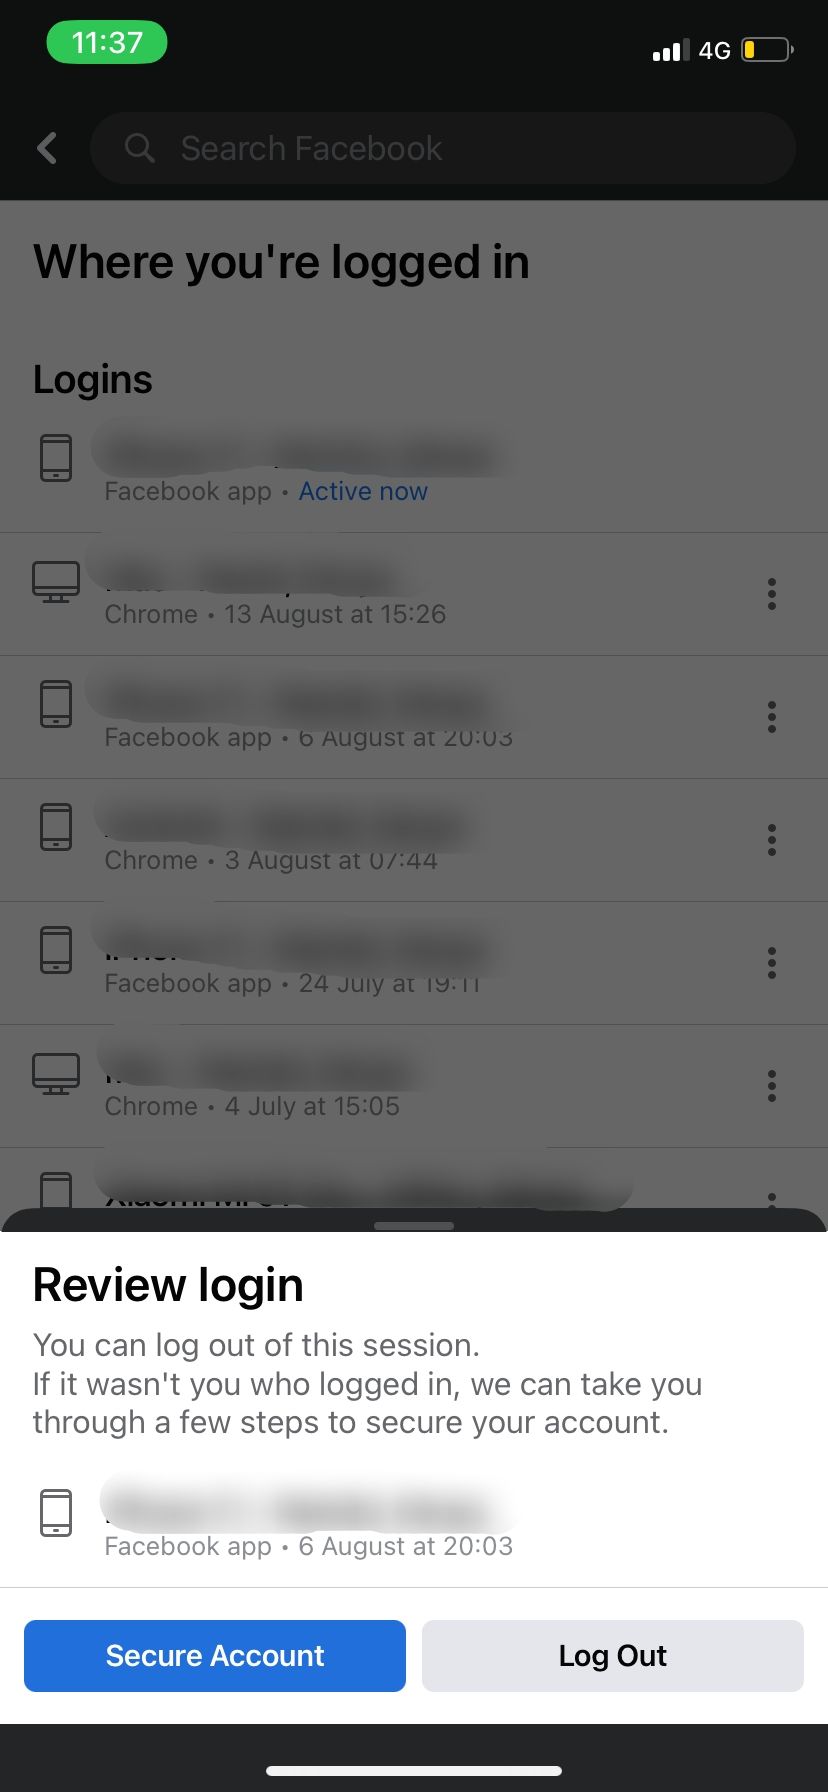 Remotely logout of Facebook on mobile